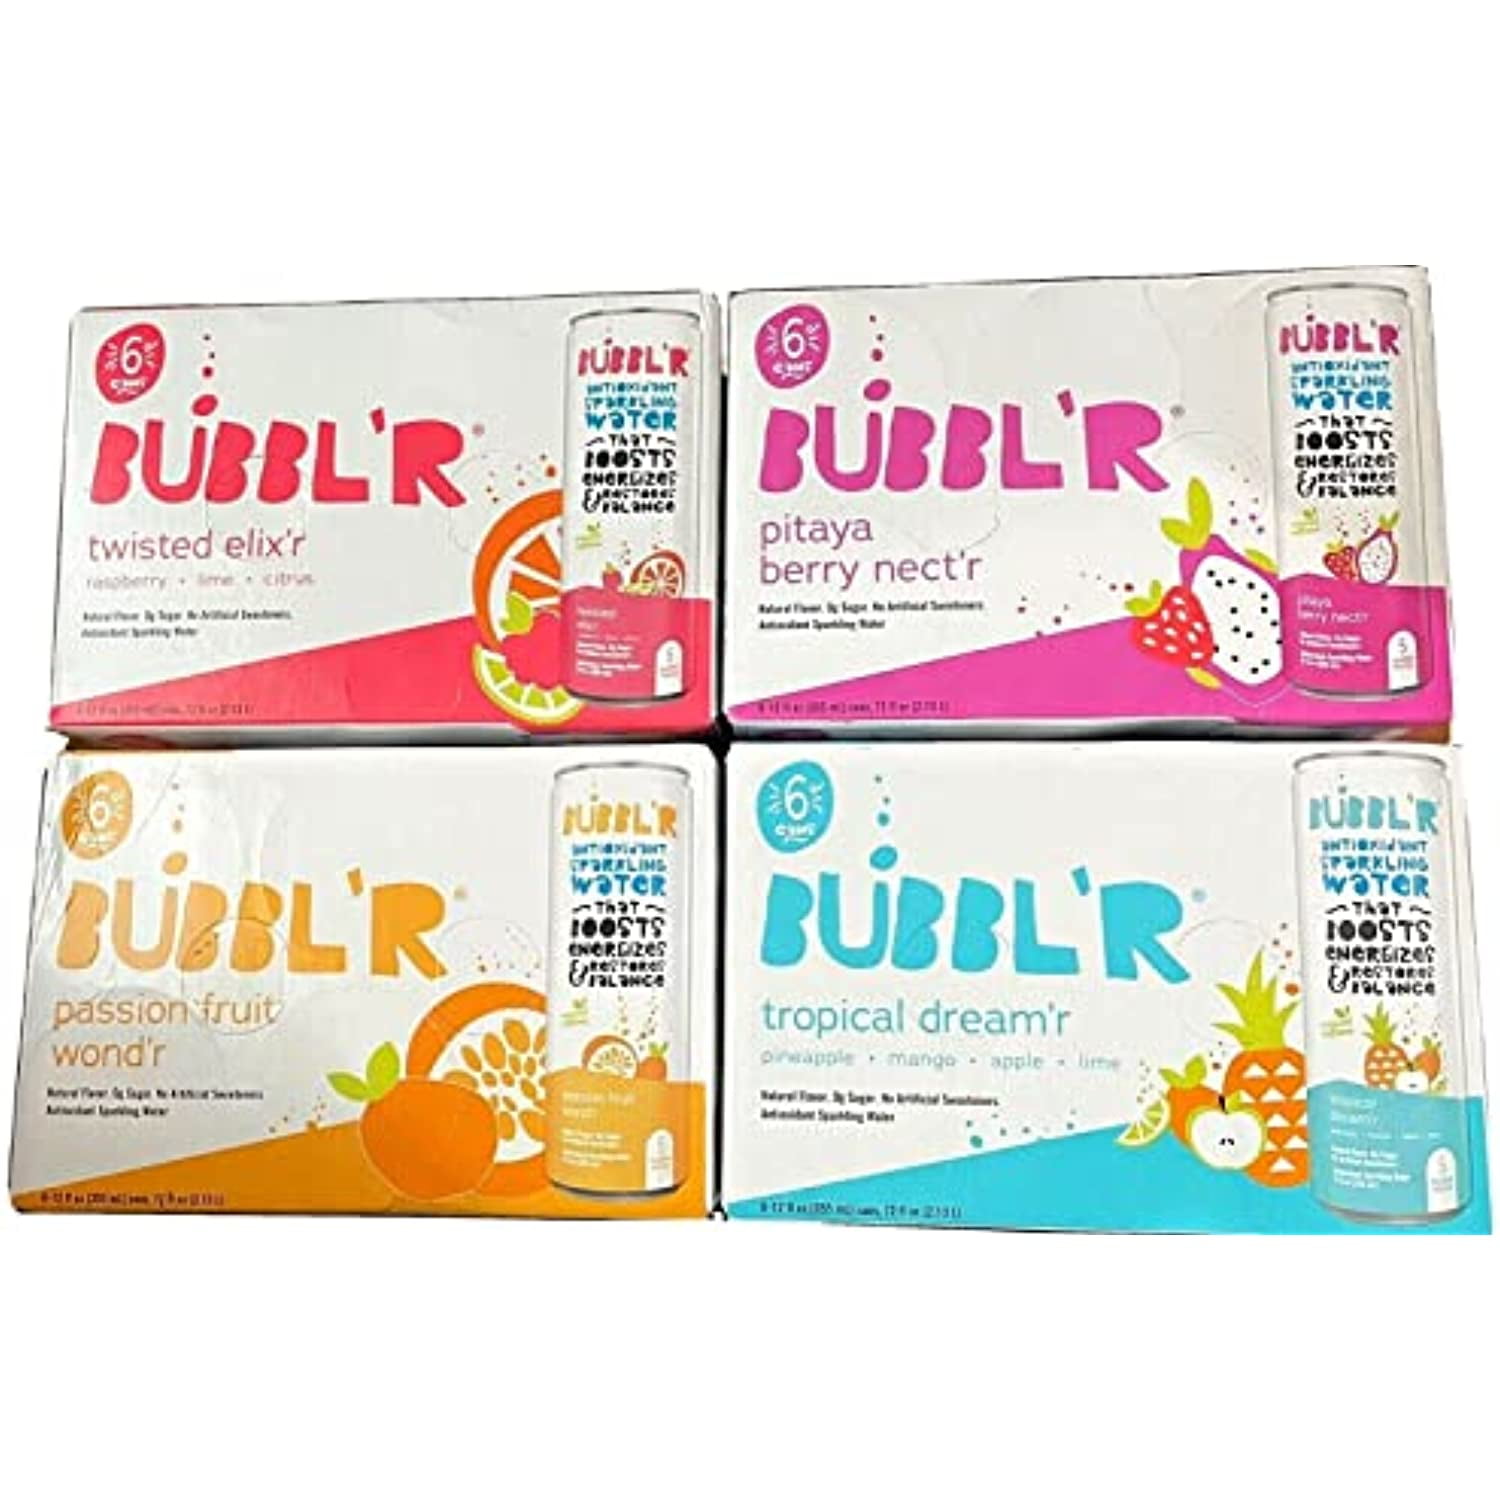 bubblr-antioxidant-sparkling-water-variety-pack-twisted-elixir